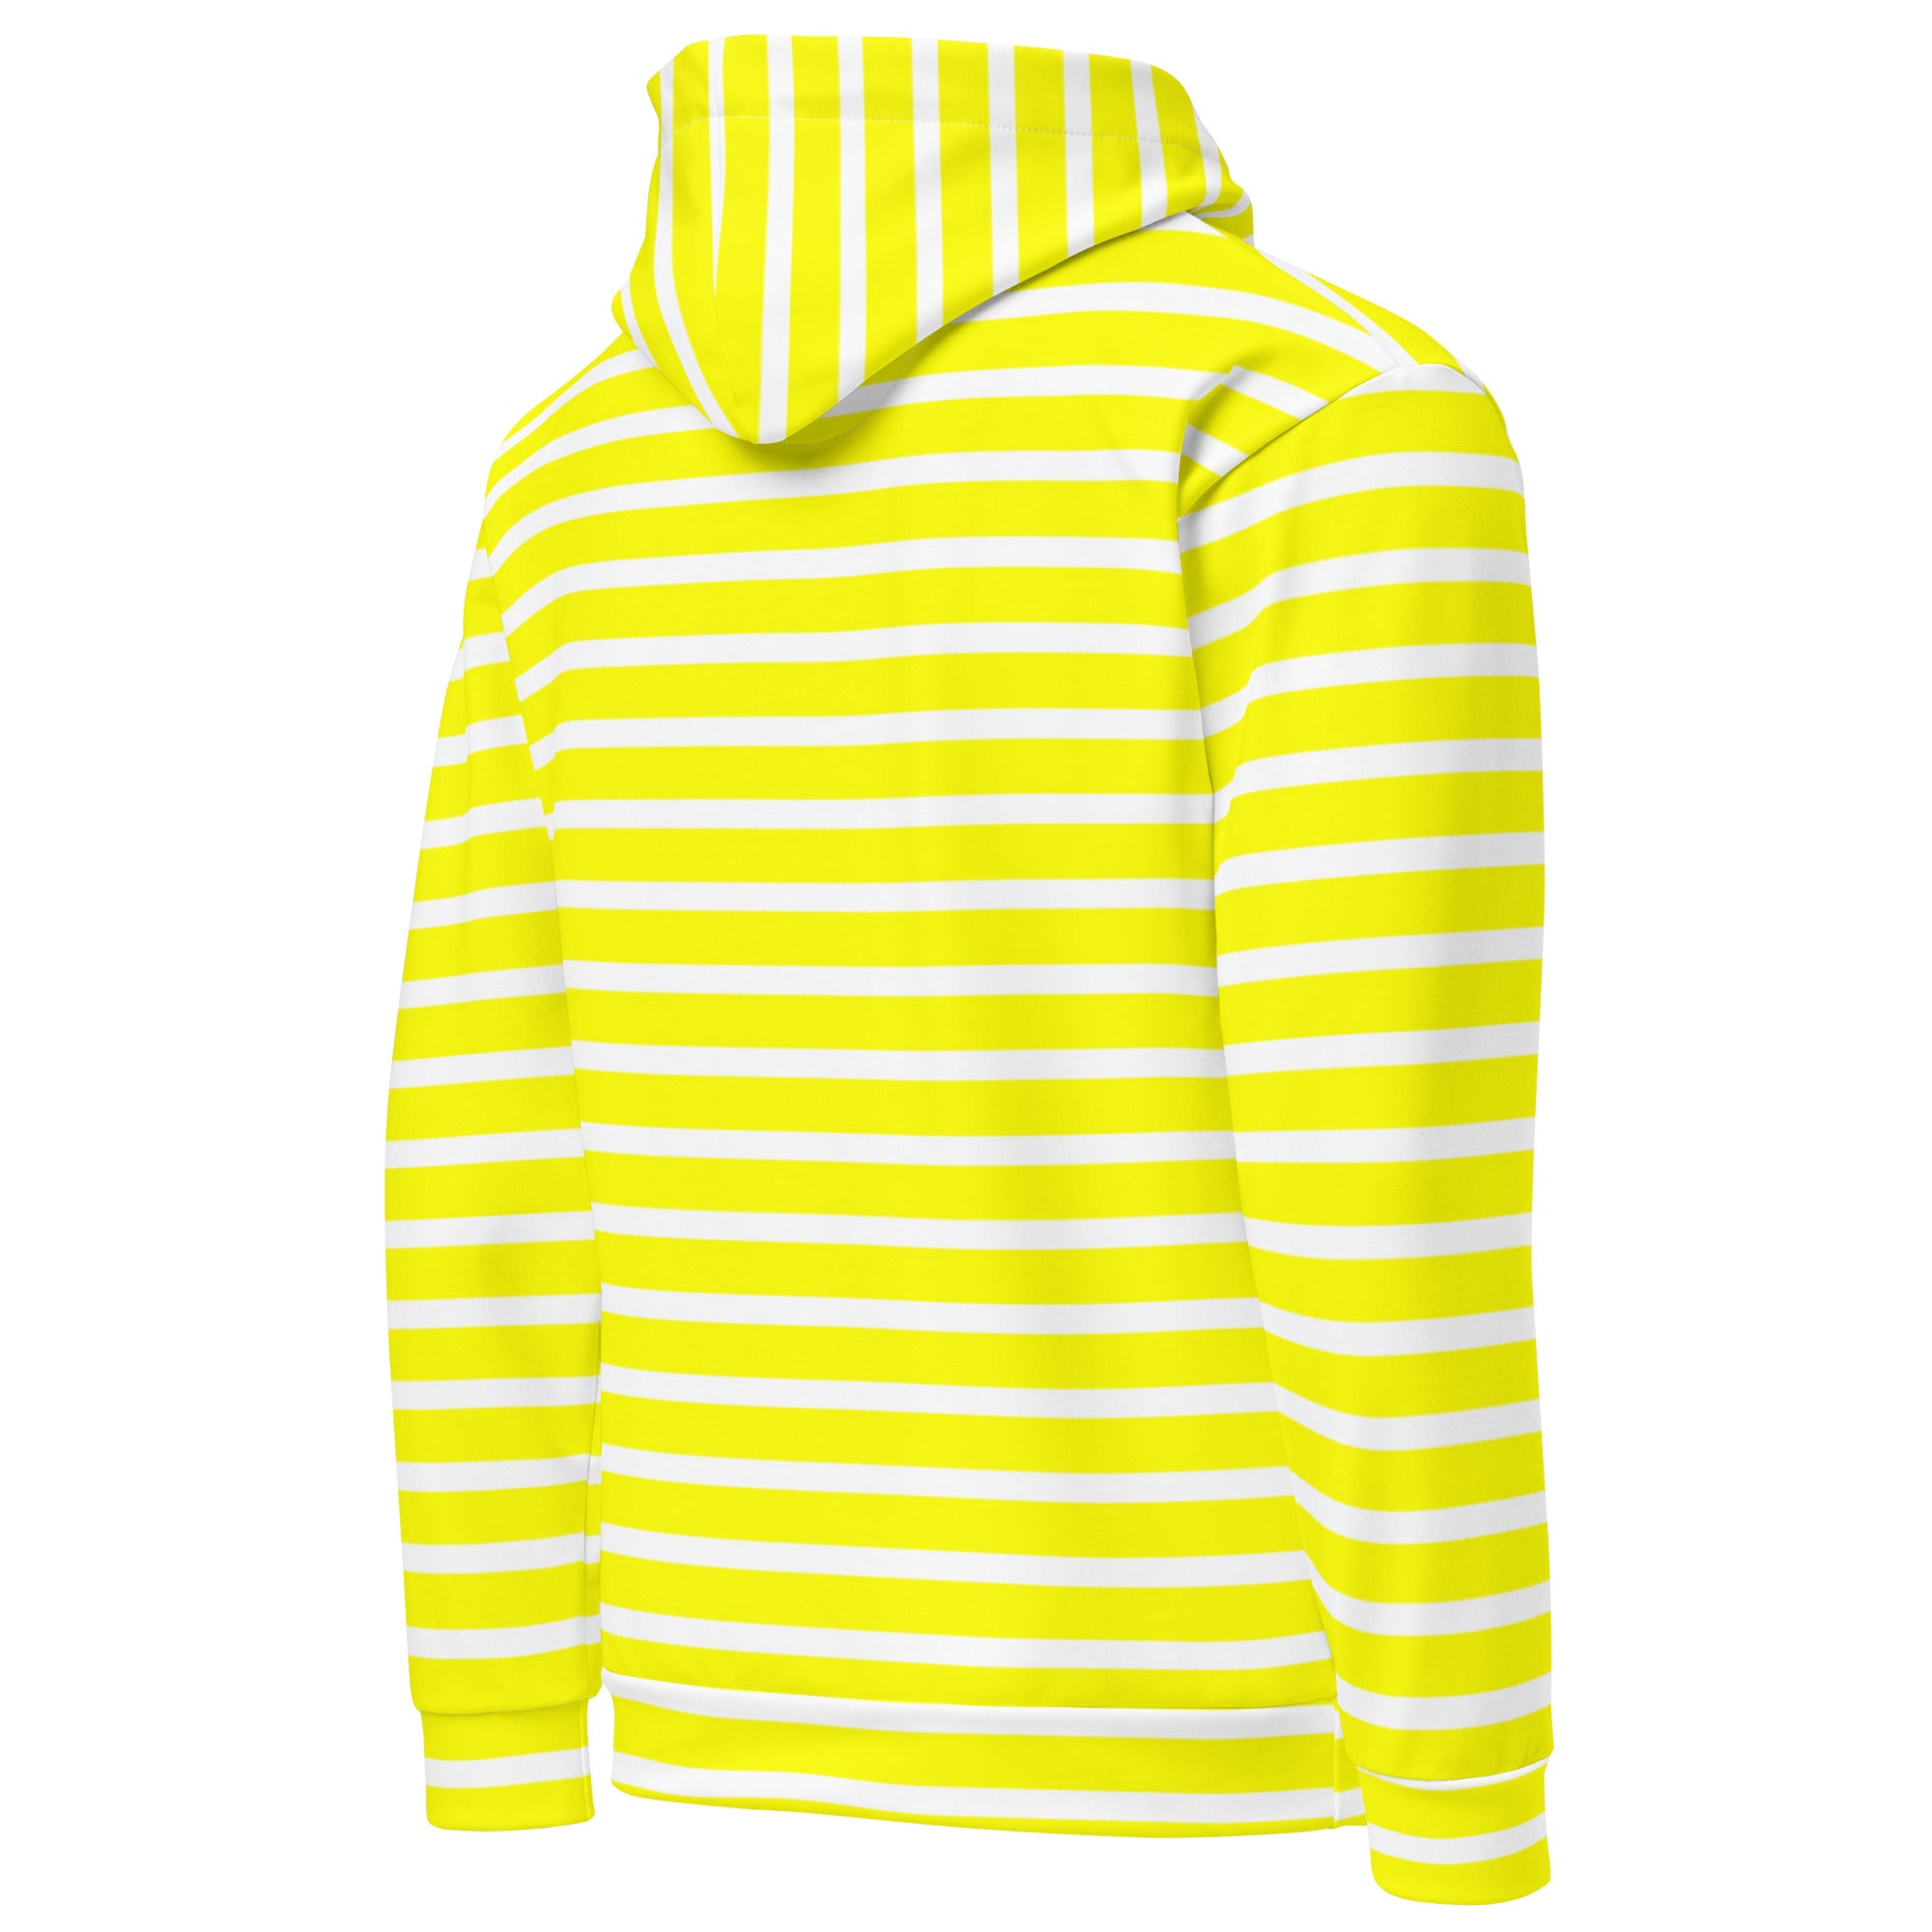 Unisex Hoodie- White and Yellow Striped